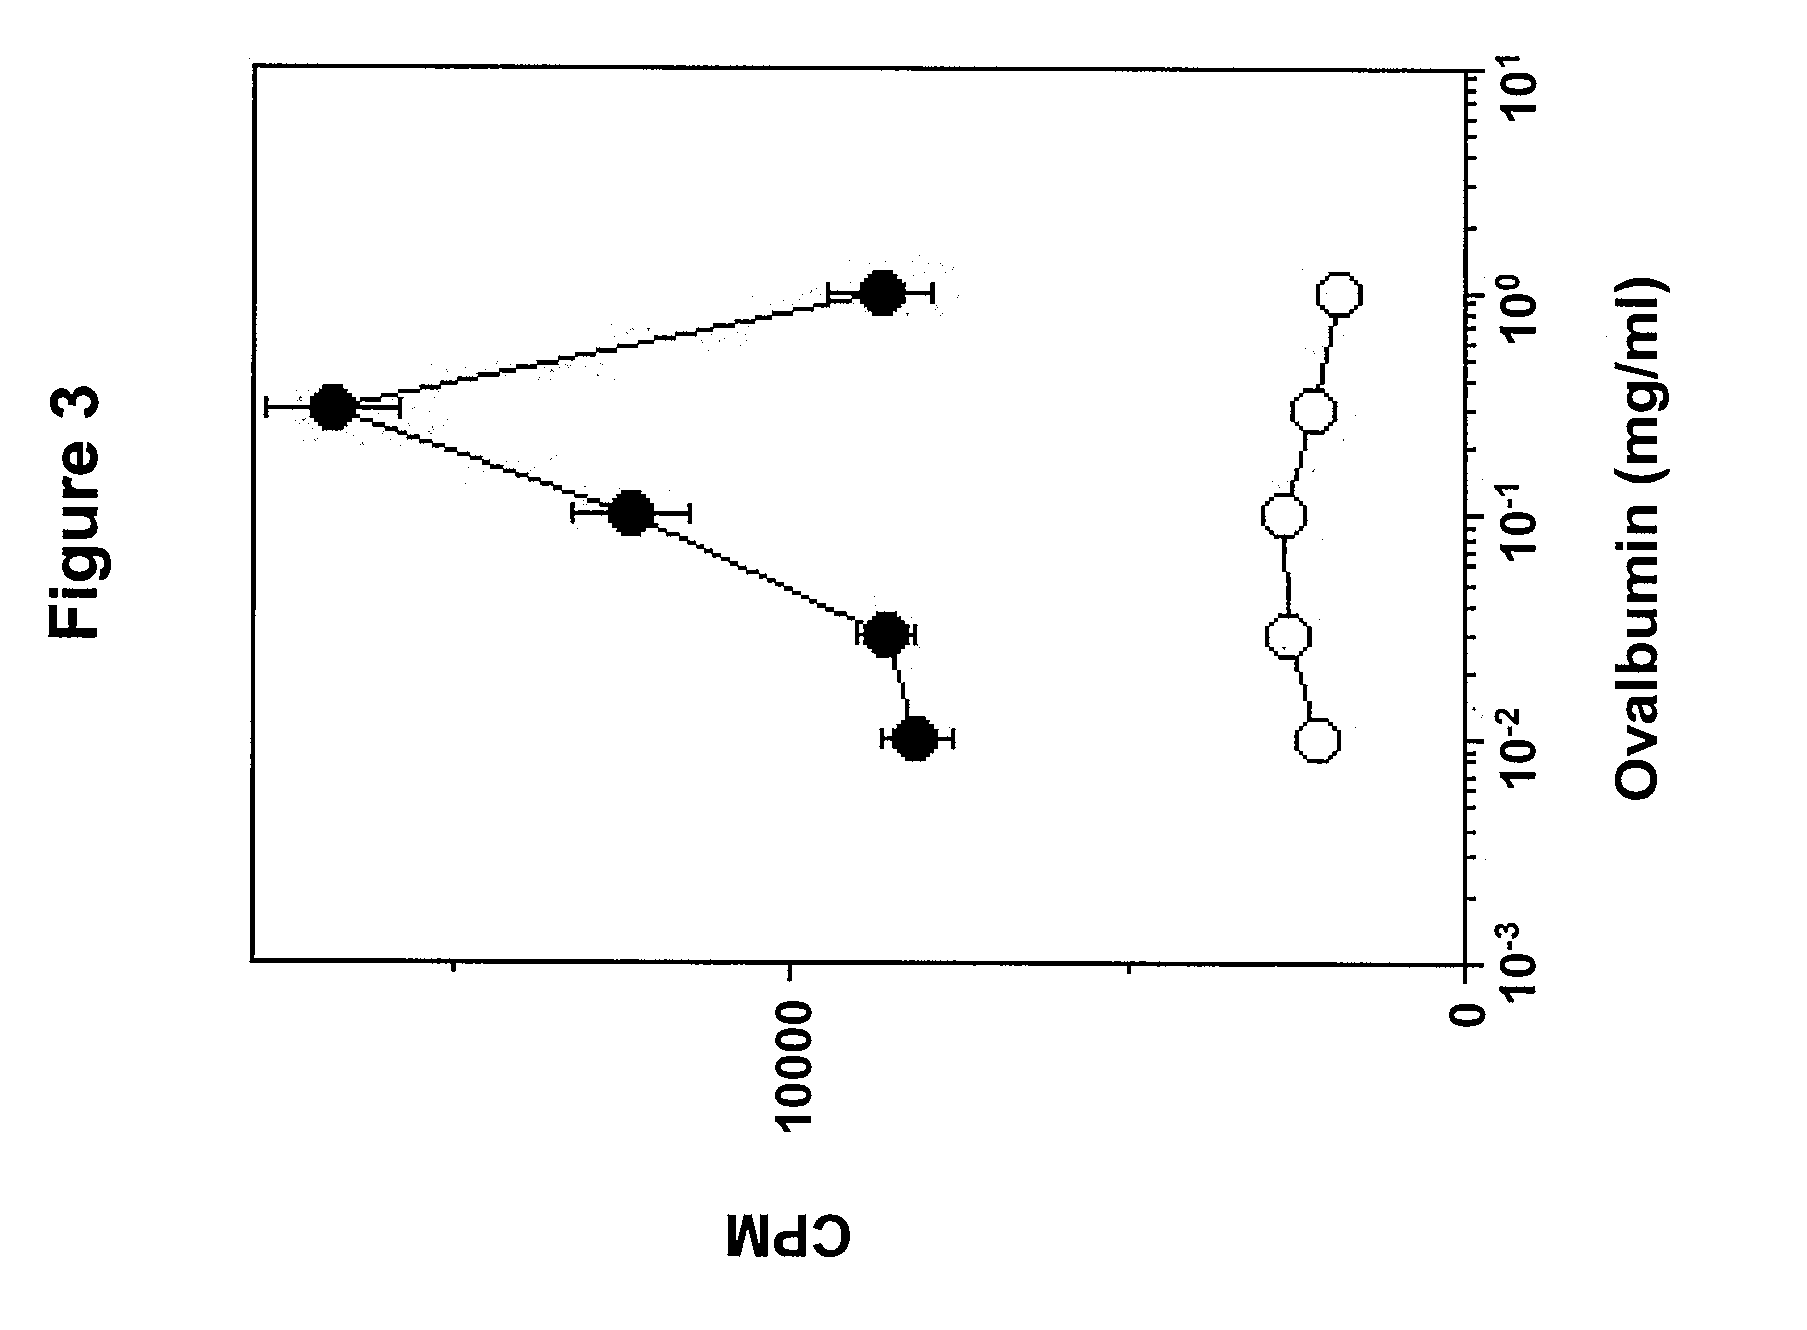 Methods and molecules for modulating an immune response